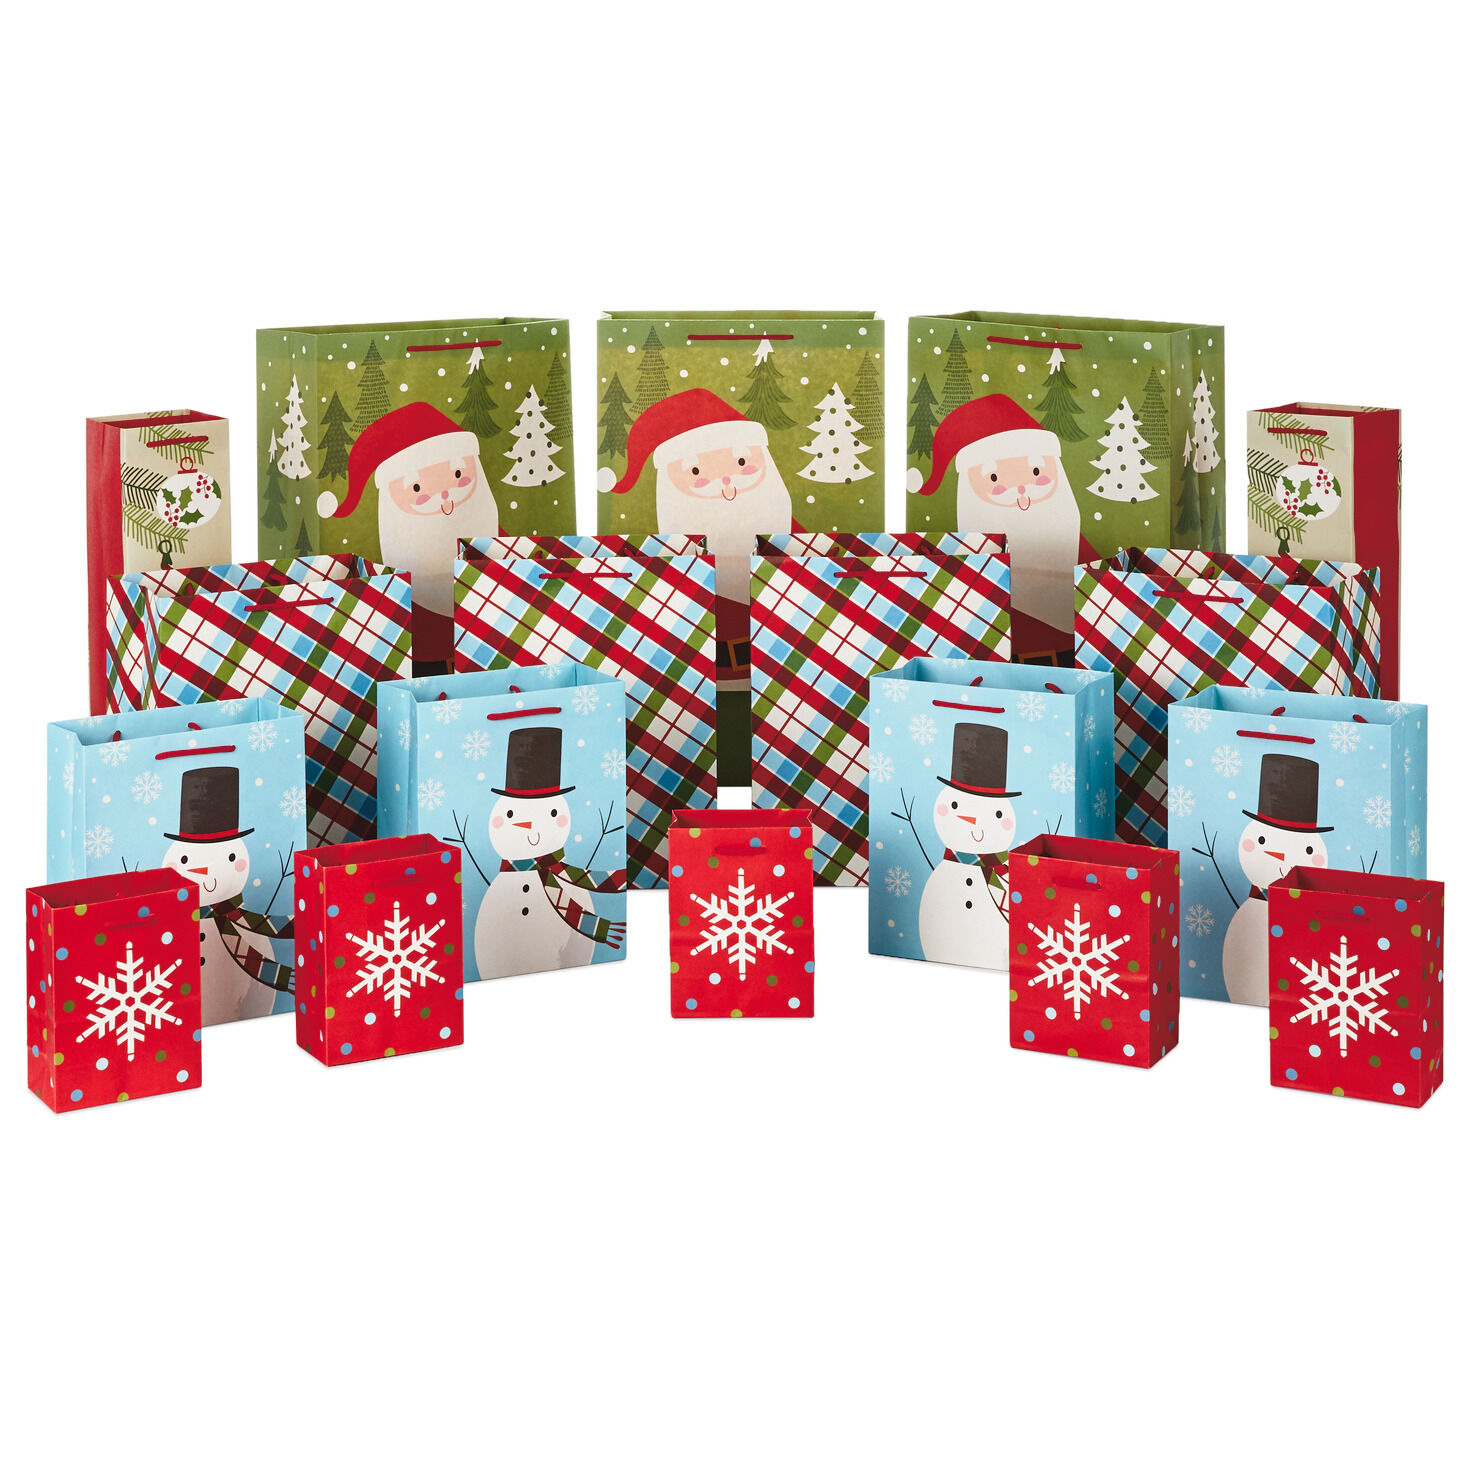 HALLMARK INSPIRATIONS PACK OF 9 ASSORTED GIFT BOXES VARIOUS SIZES CHRISTMAS 